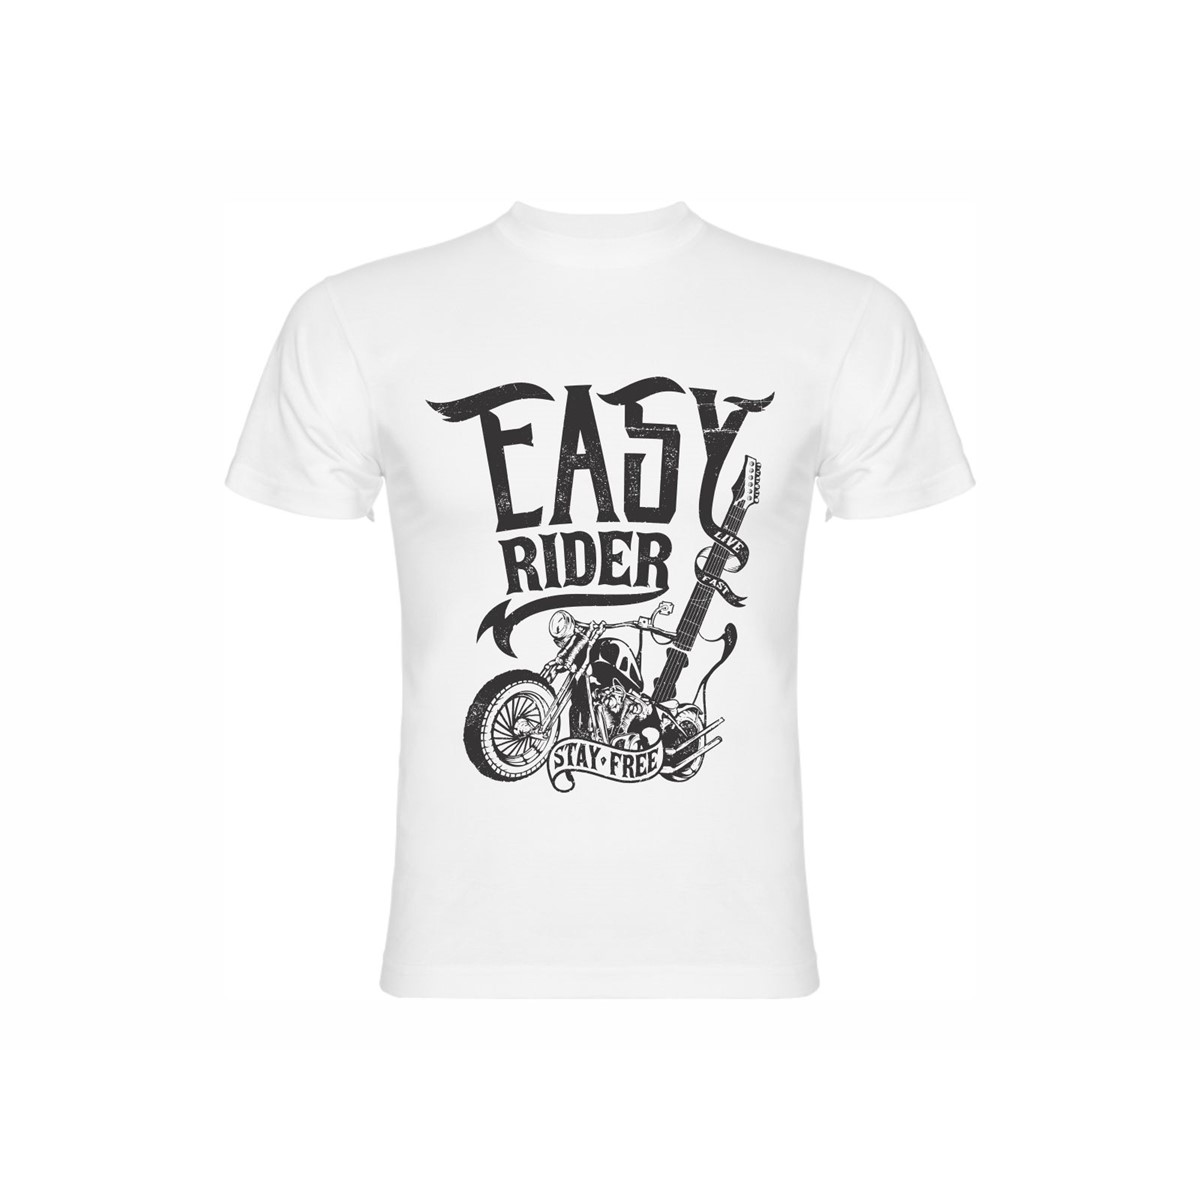 http://images.habeco.si/Upload/Product/t-shirt-easy-rider_11090_full.jpg